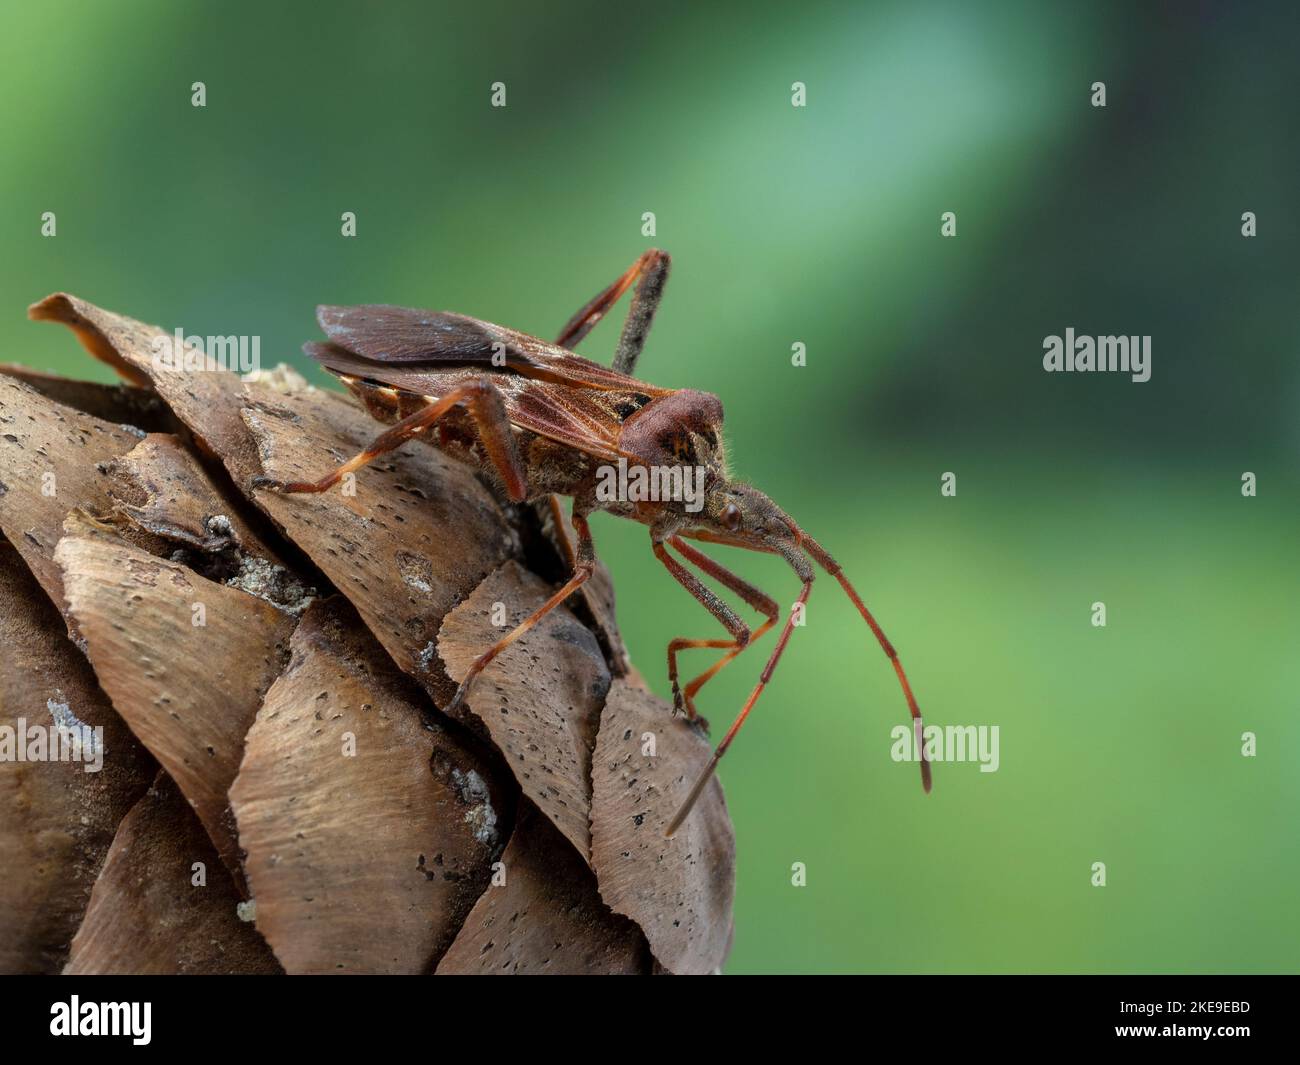 side view of a western conifer seed bug, Leptoglossus occidentalis, resting on a pine cone Stock Photo